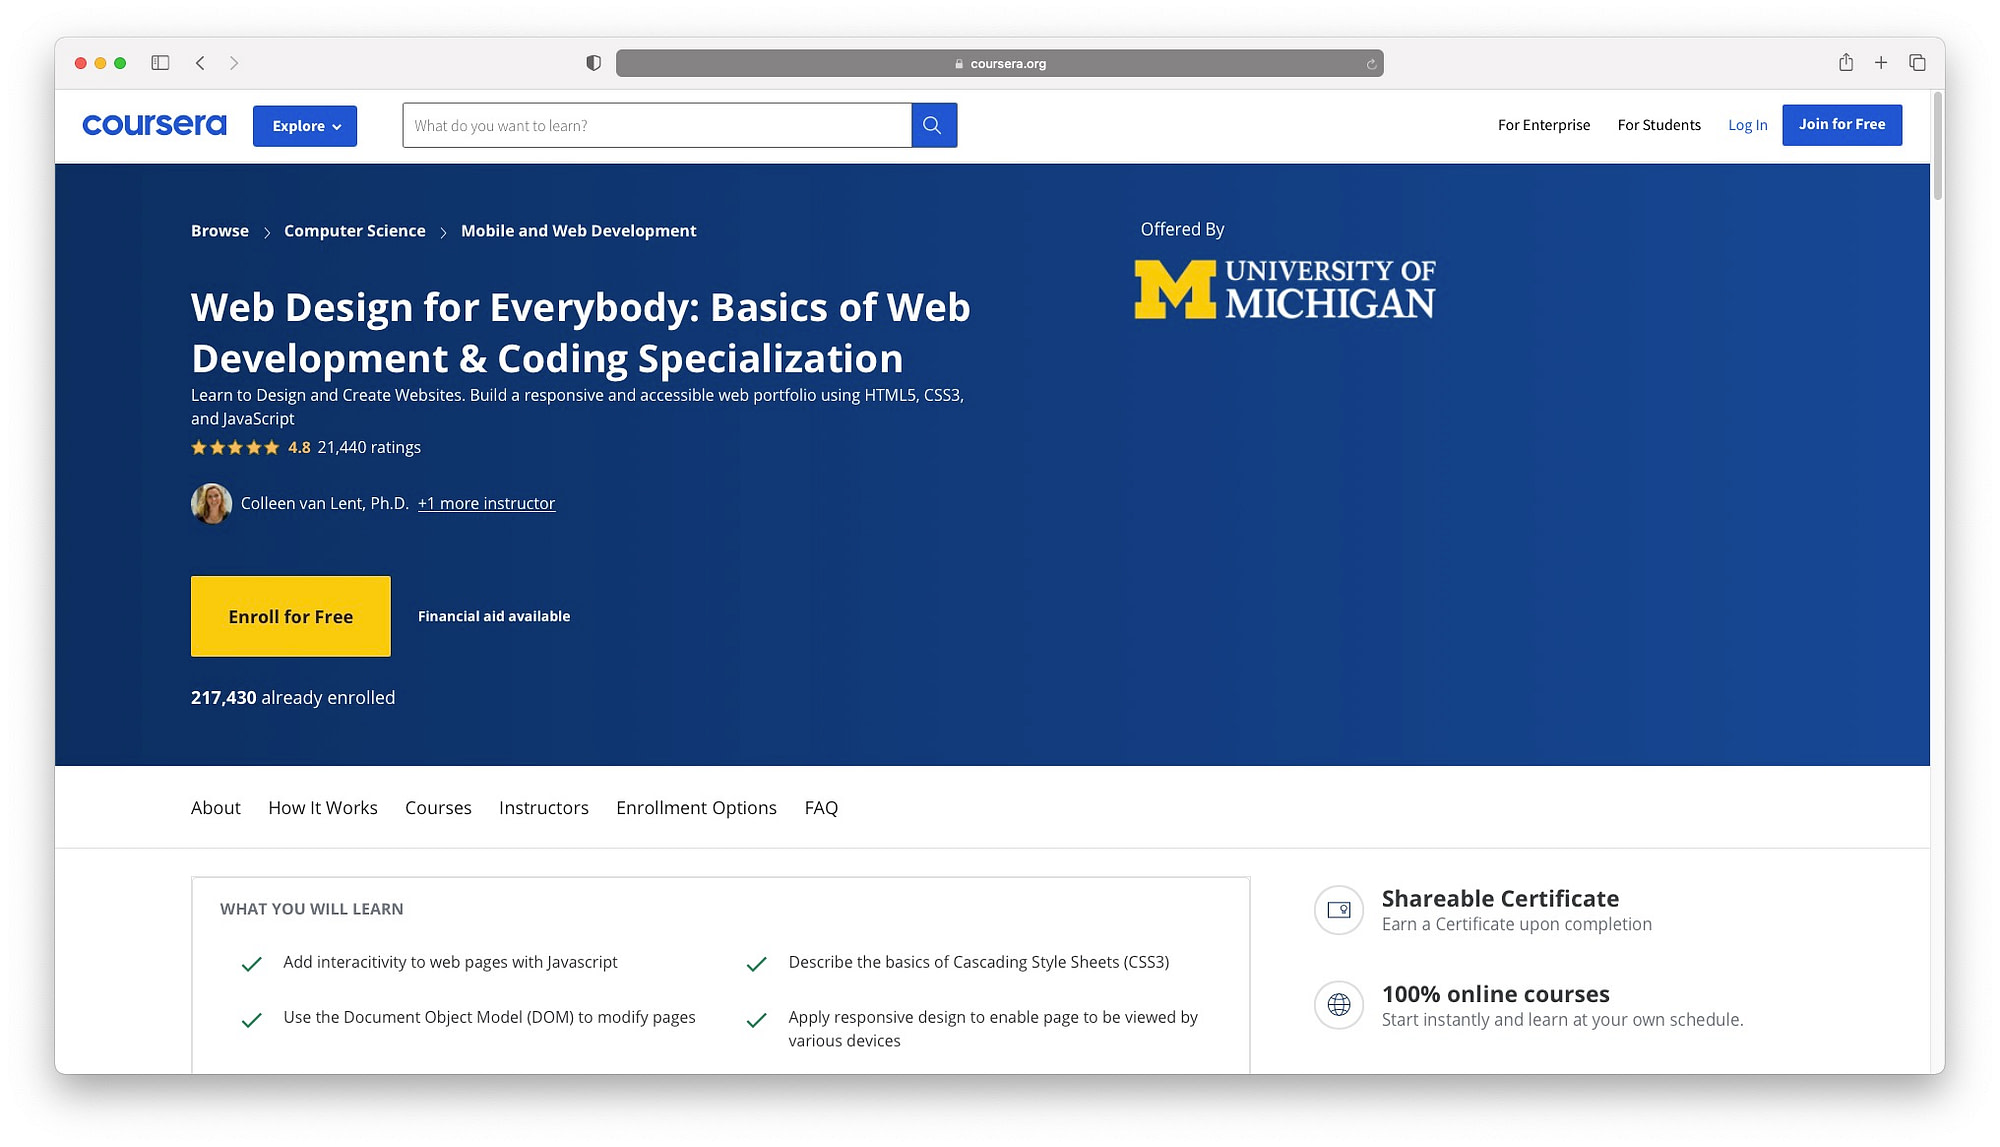 Web design courses online don't come cheaper than Coursera's free offer from University of Michigan